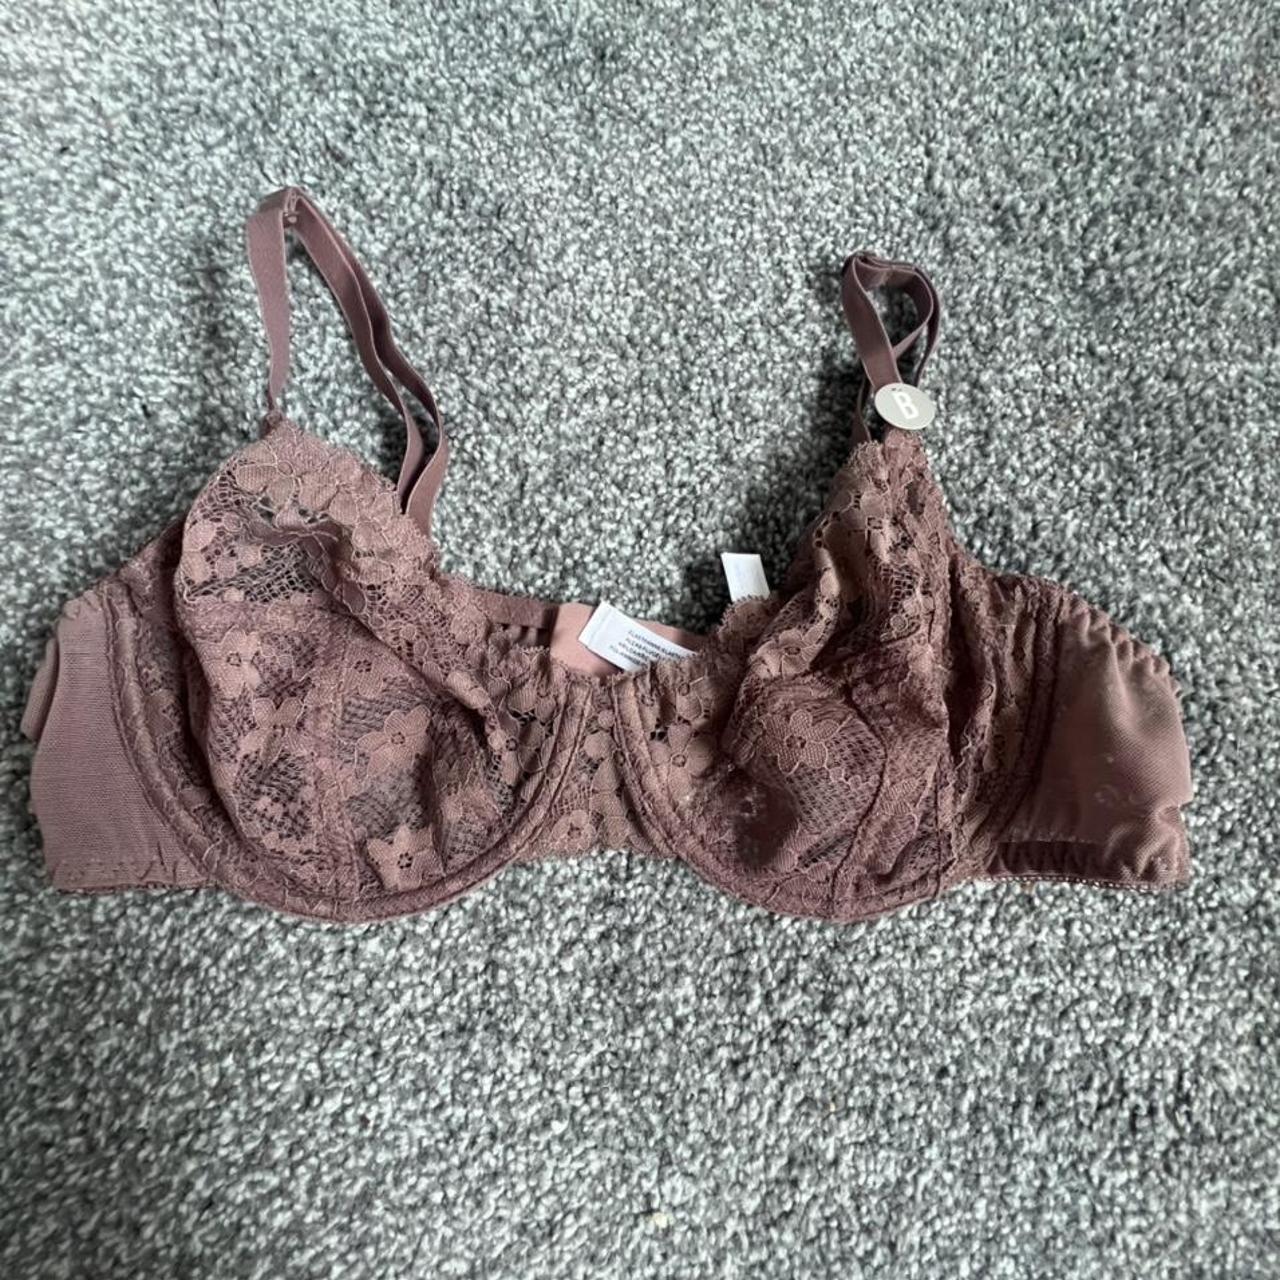 Primark Mocha Lace Bra Brand new with tags Size... - Depop